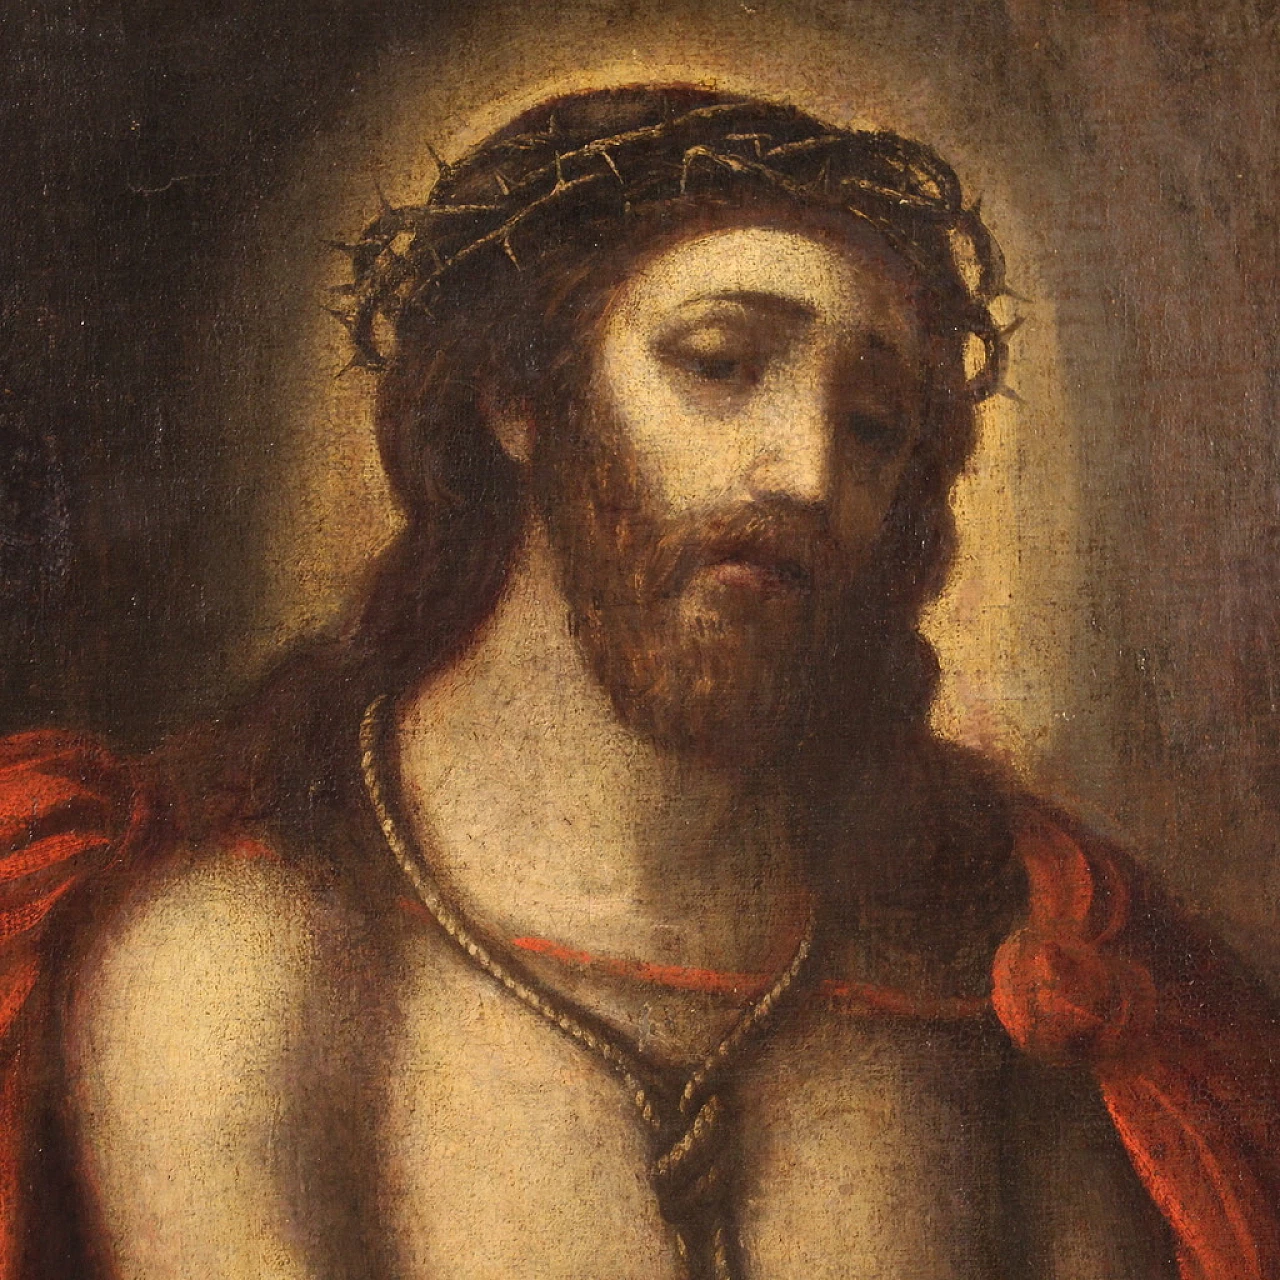 Ecce Homo painting, oil on canvas, 17th century 5